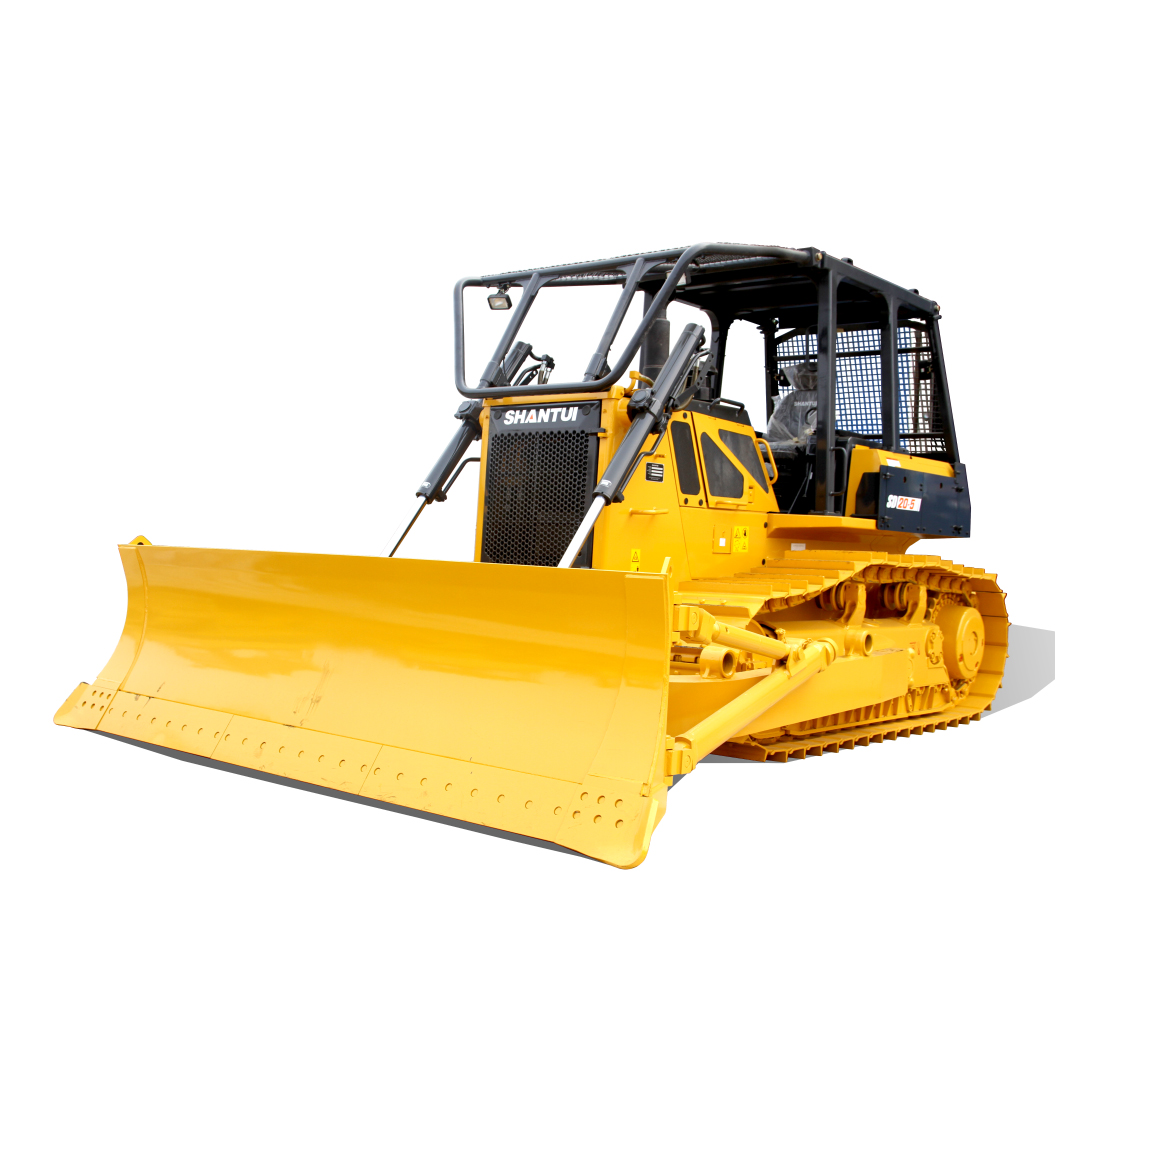 Excellent quality Tandem Vibratory Roller - Shantui 21ton 240Hp Bulldozer SD20-B5 with Widen Track Shoe Good Price – China Construction